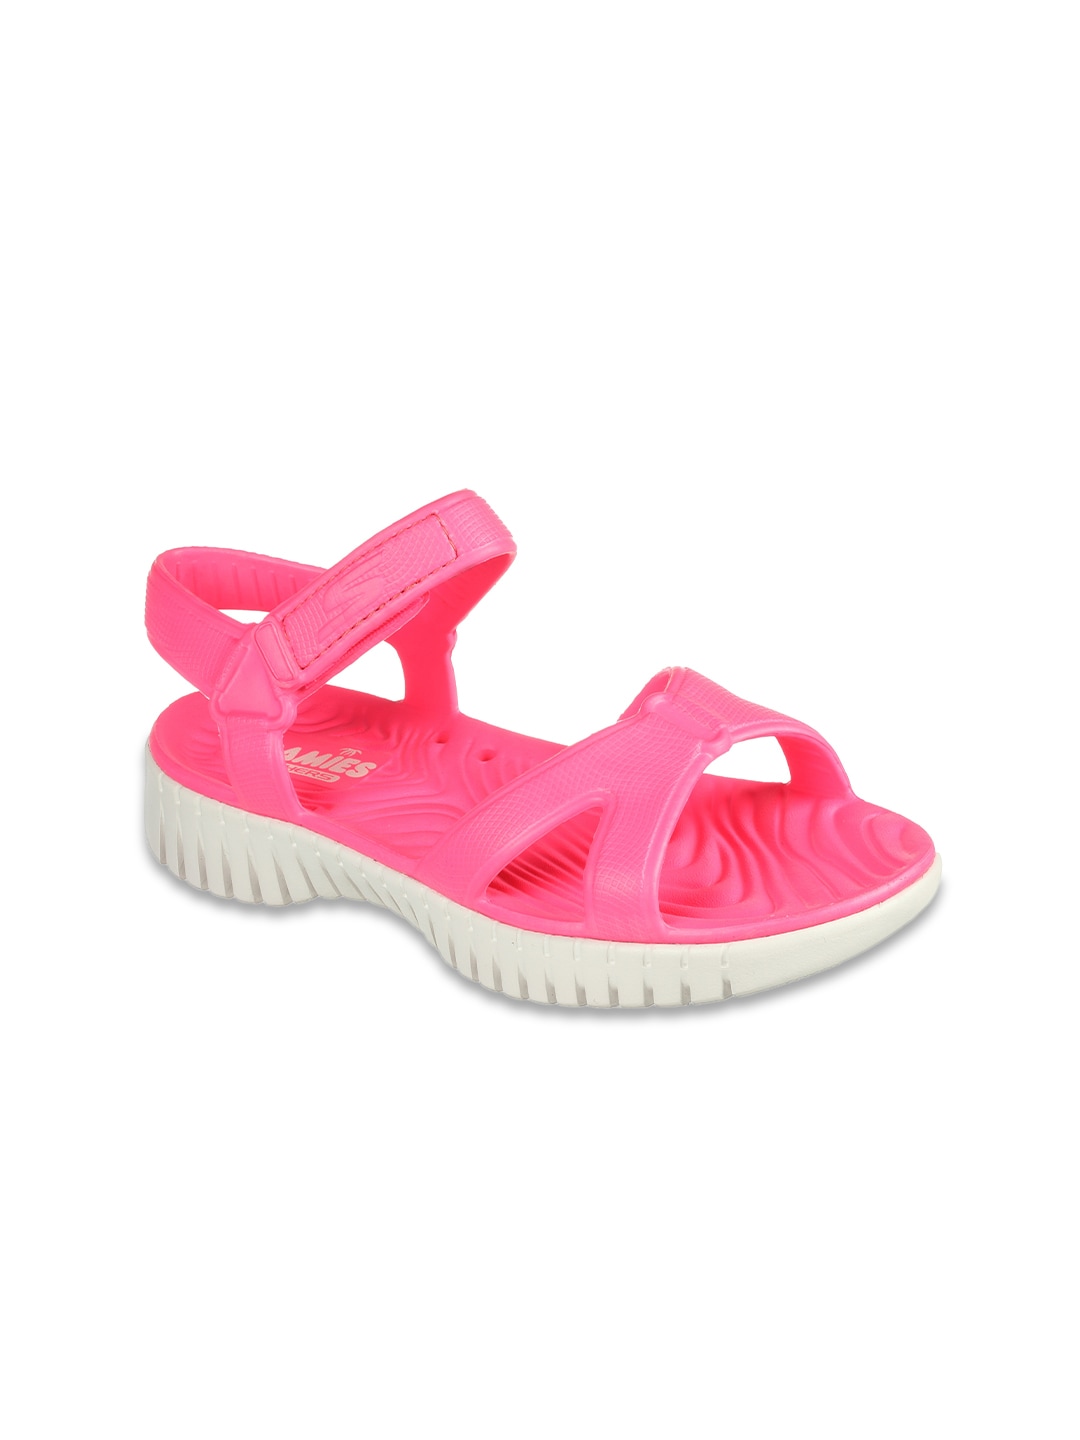 Skechers Women Pink Sports Sandals Price in India